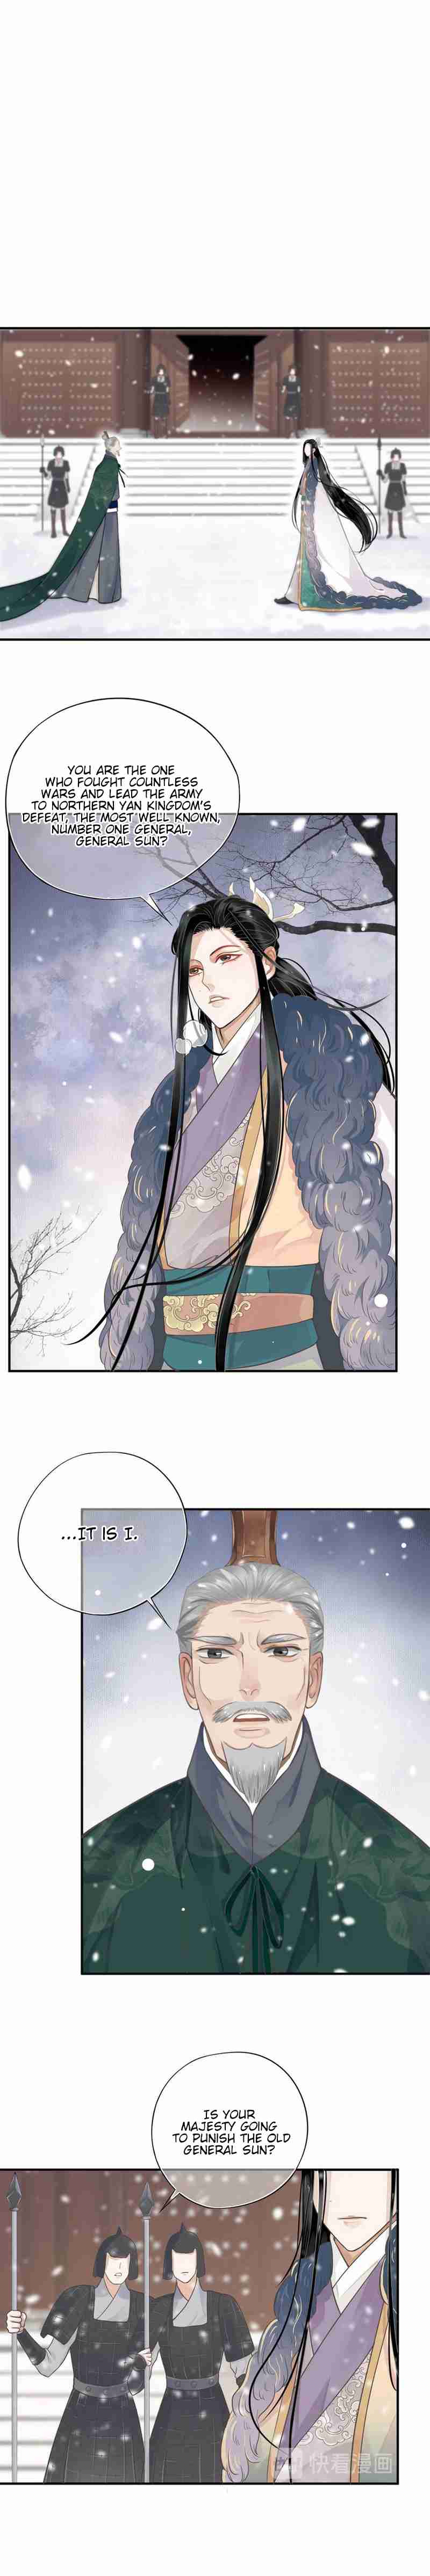 To Be Or Not To Be Ch. 6 The Struggle Within the Snow